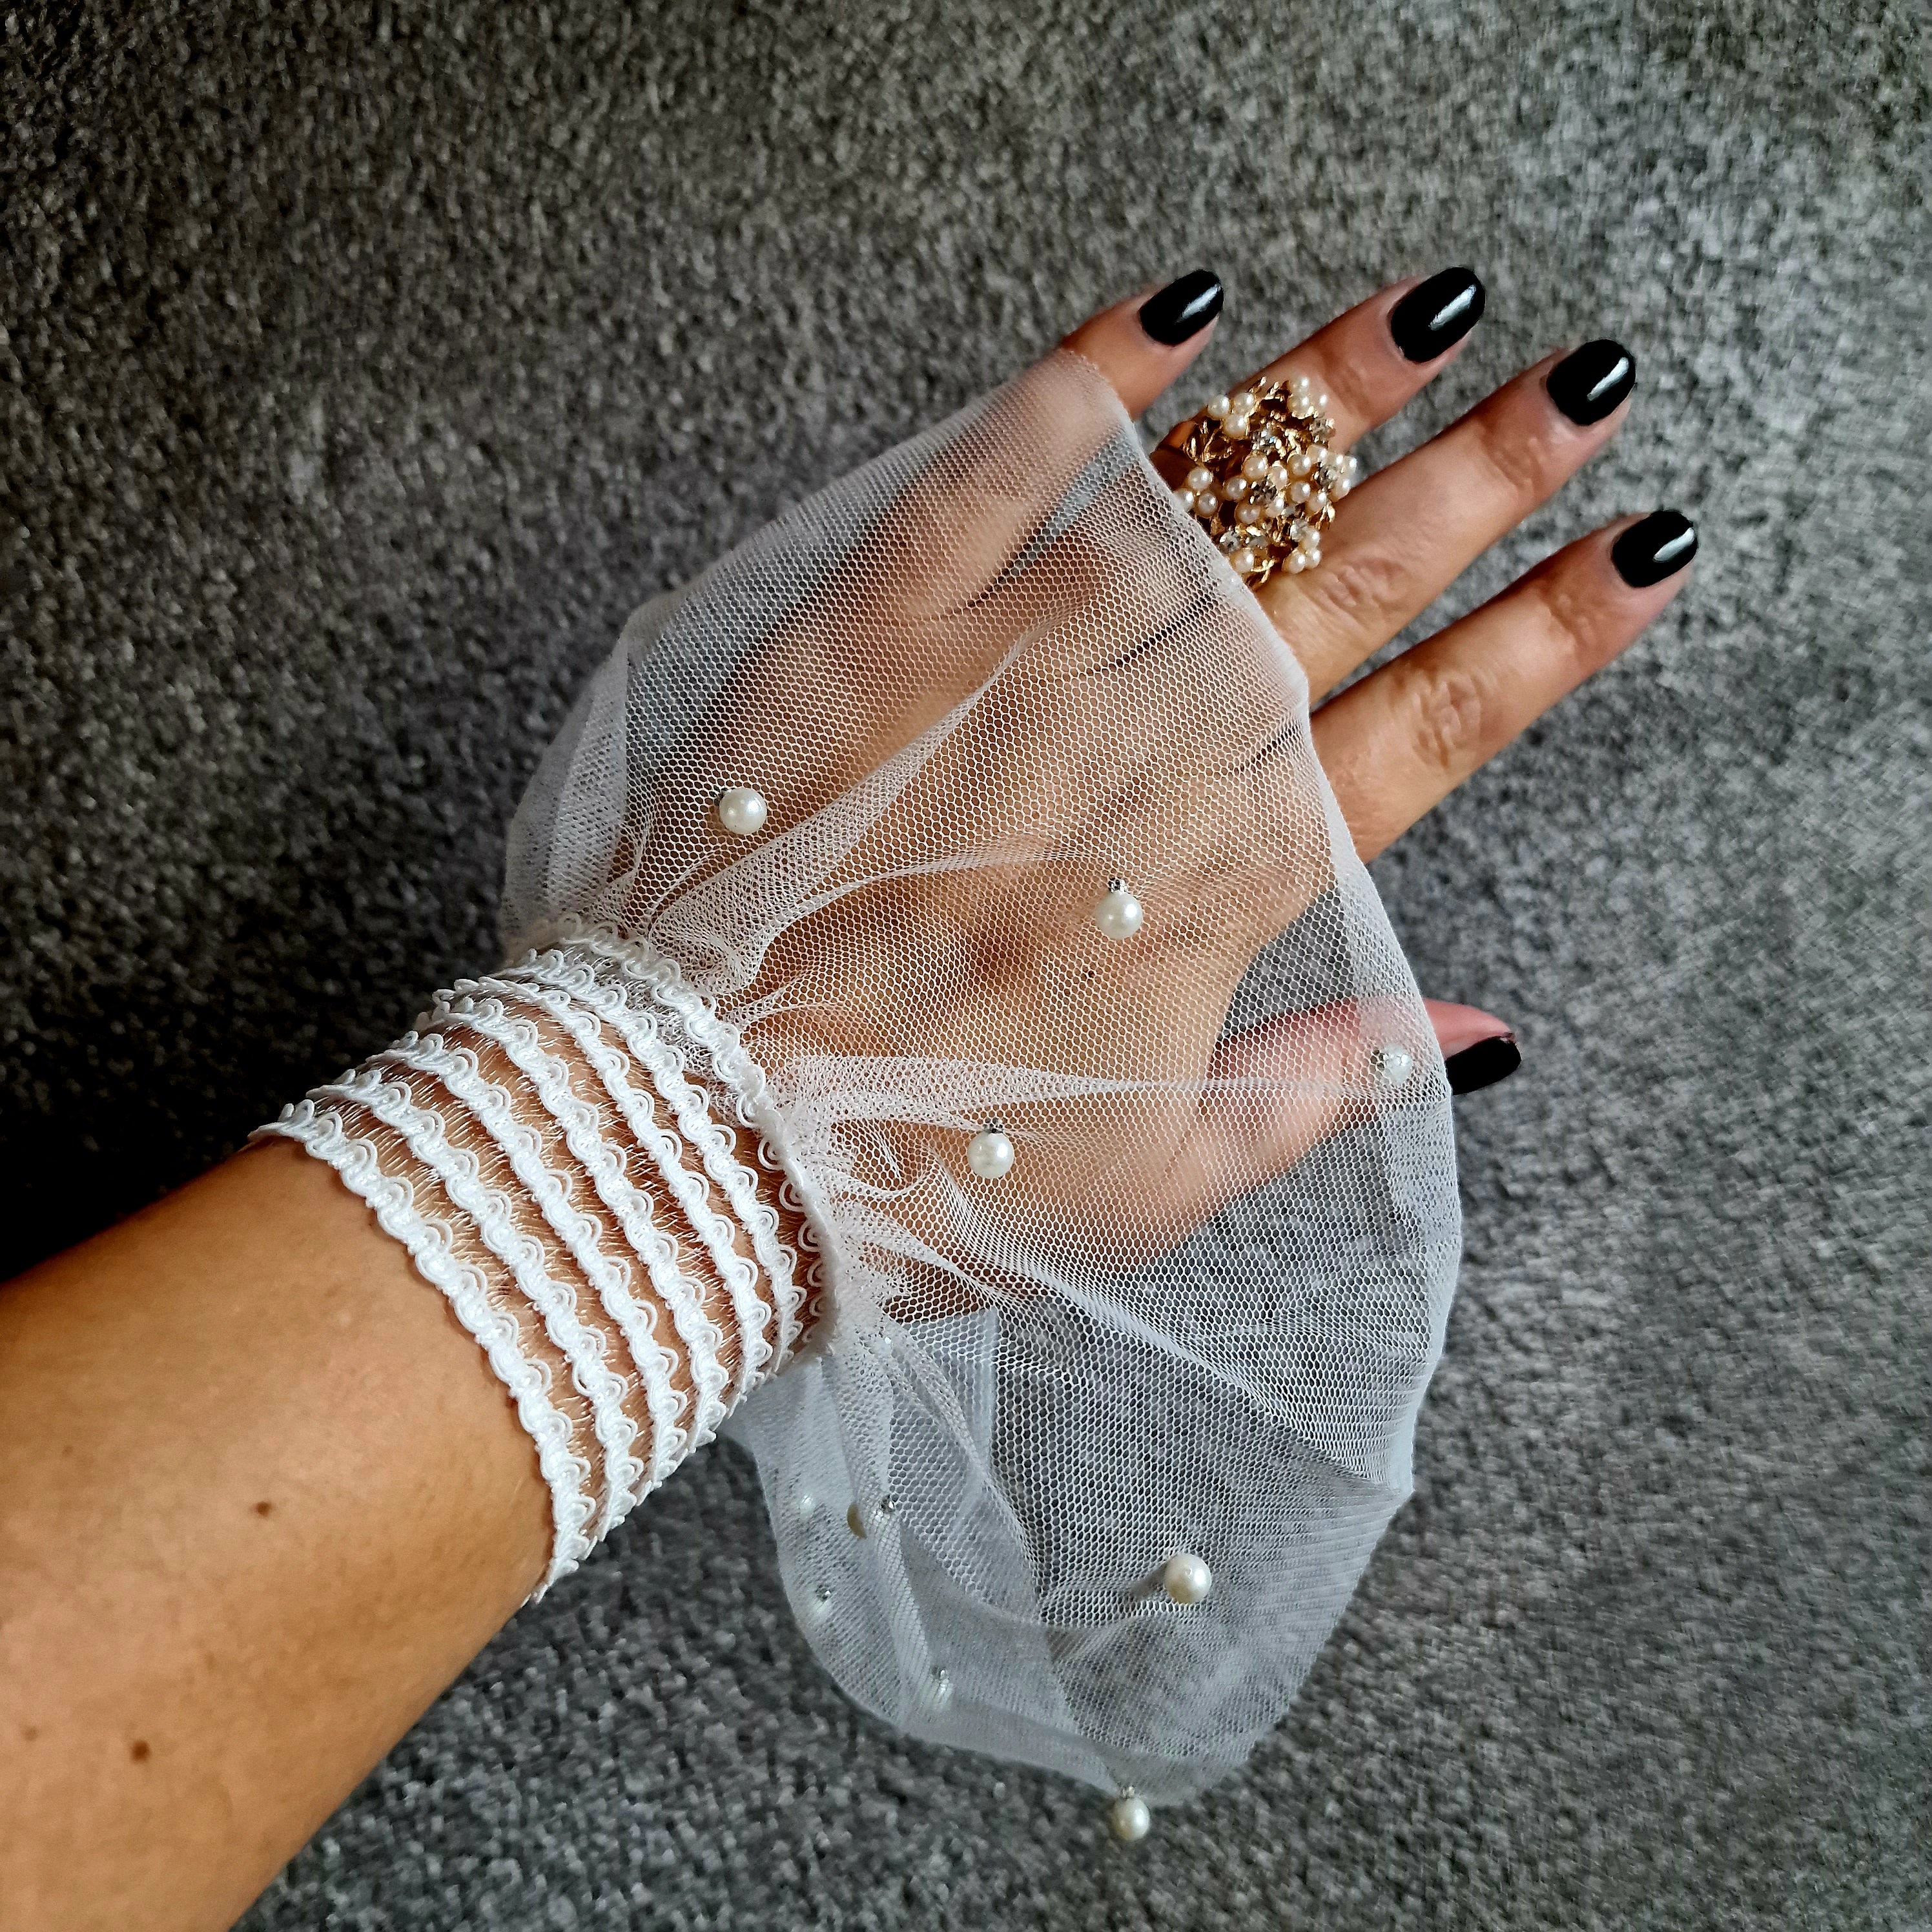 Casual Minimal Goth Romantic White Tulle Cuffs-SimpleModerne